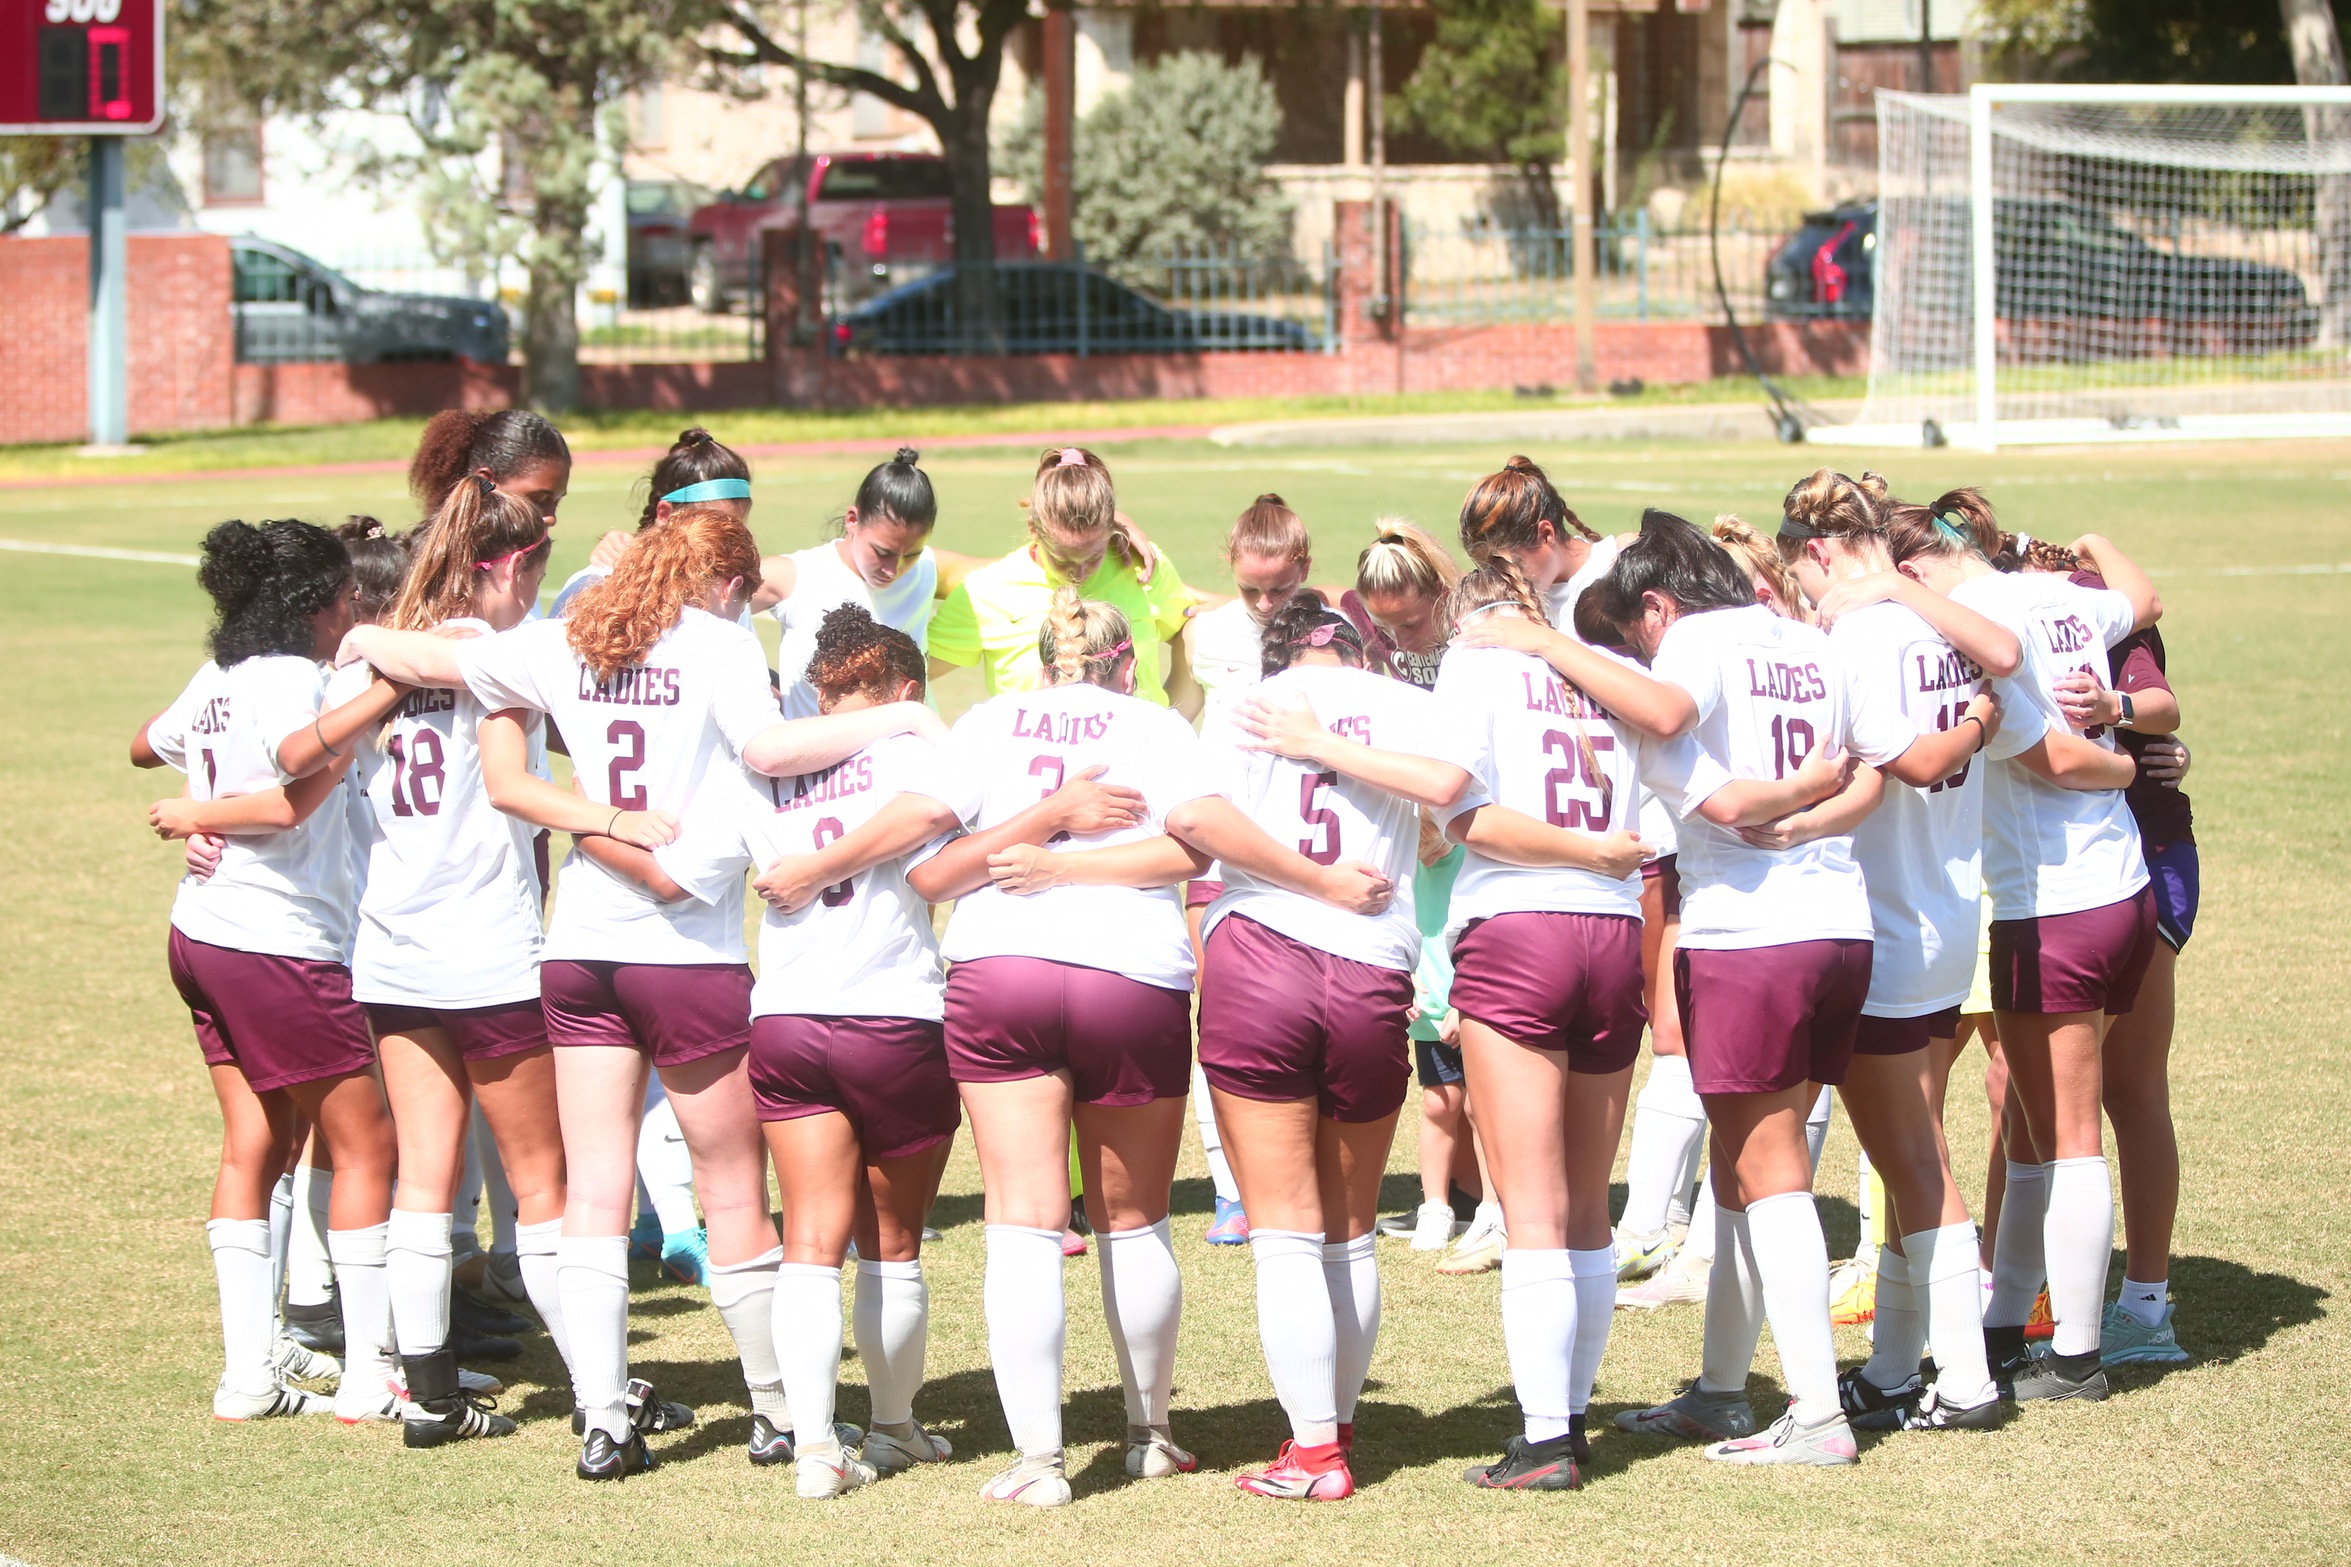 The Ladies are back home next weekend for a pair of conference matches versus Schreiner and Trinity.